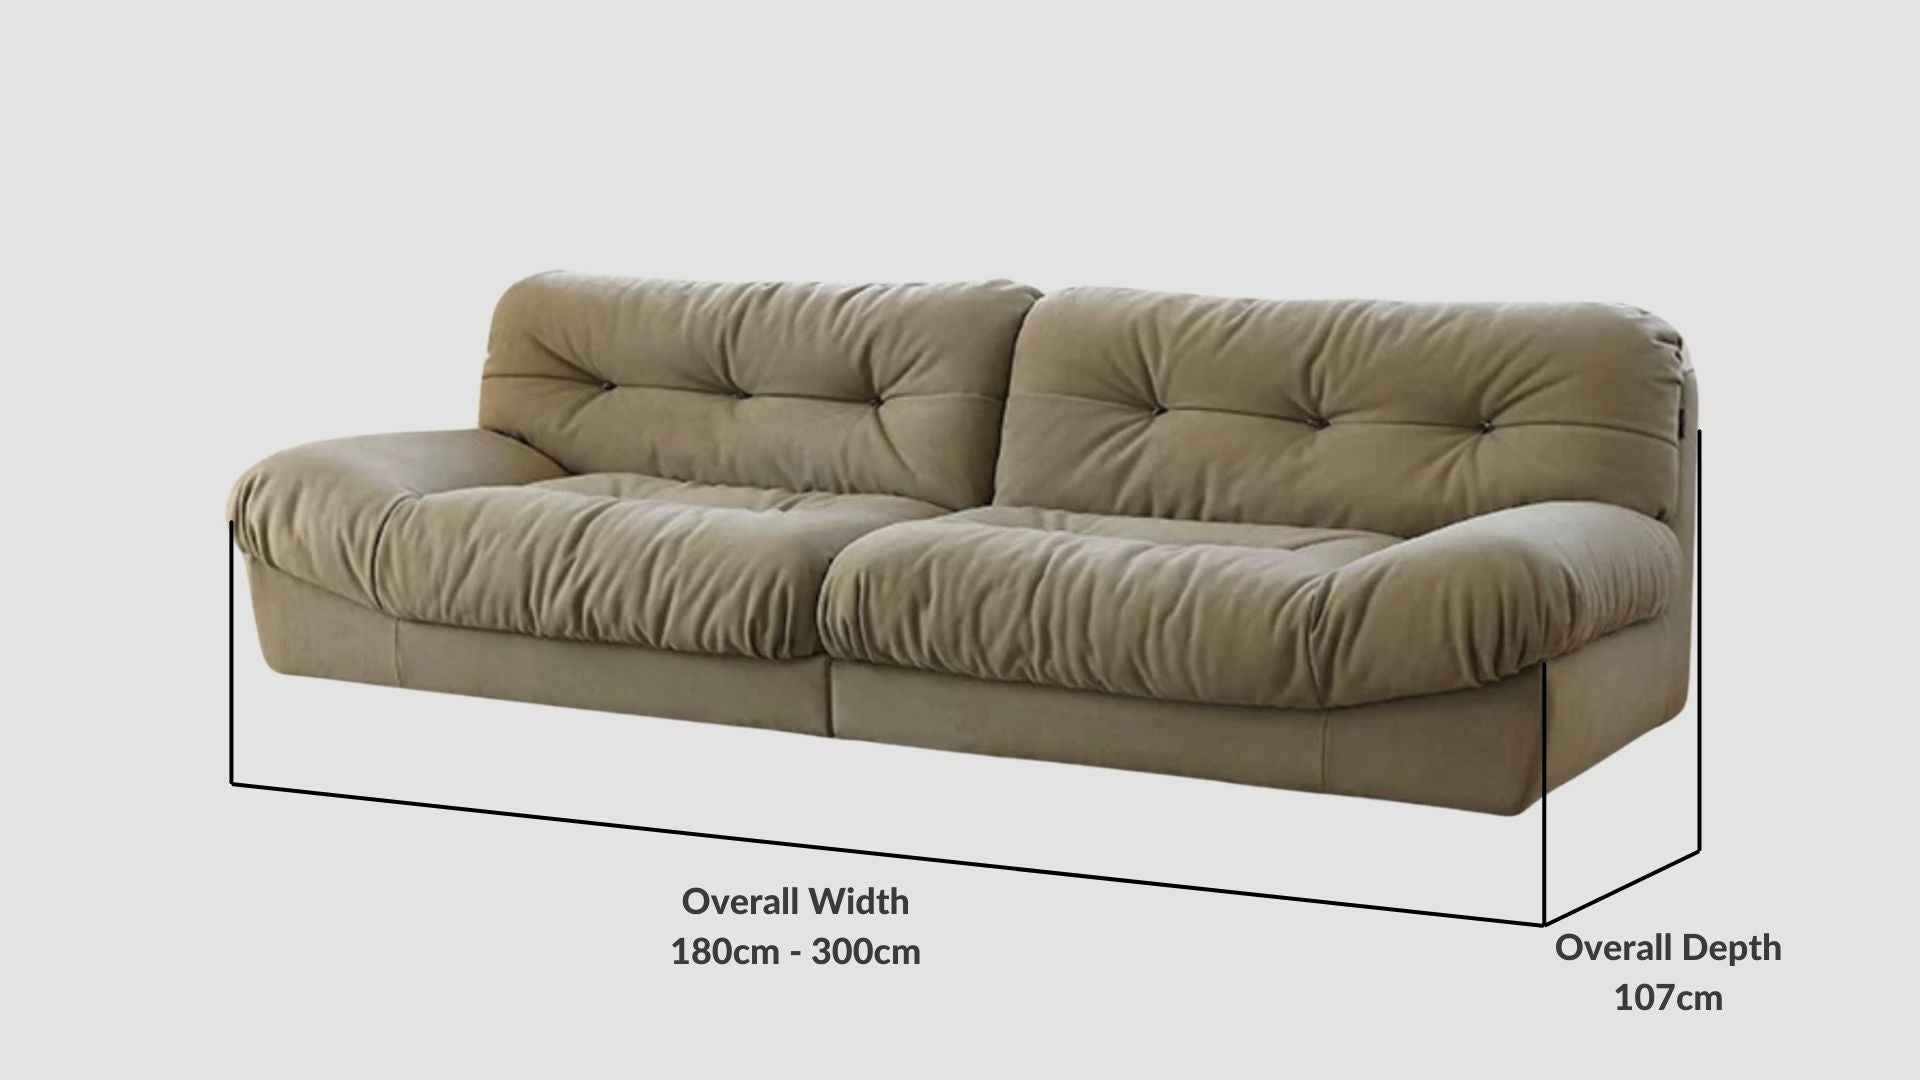 Details the key dimensions in terms of overall width, overall depth and seat width for Clora Fabric Sofa